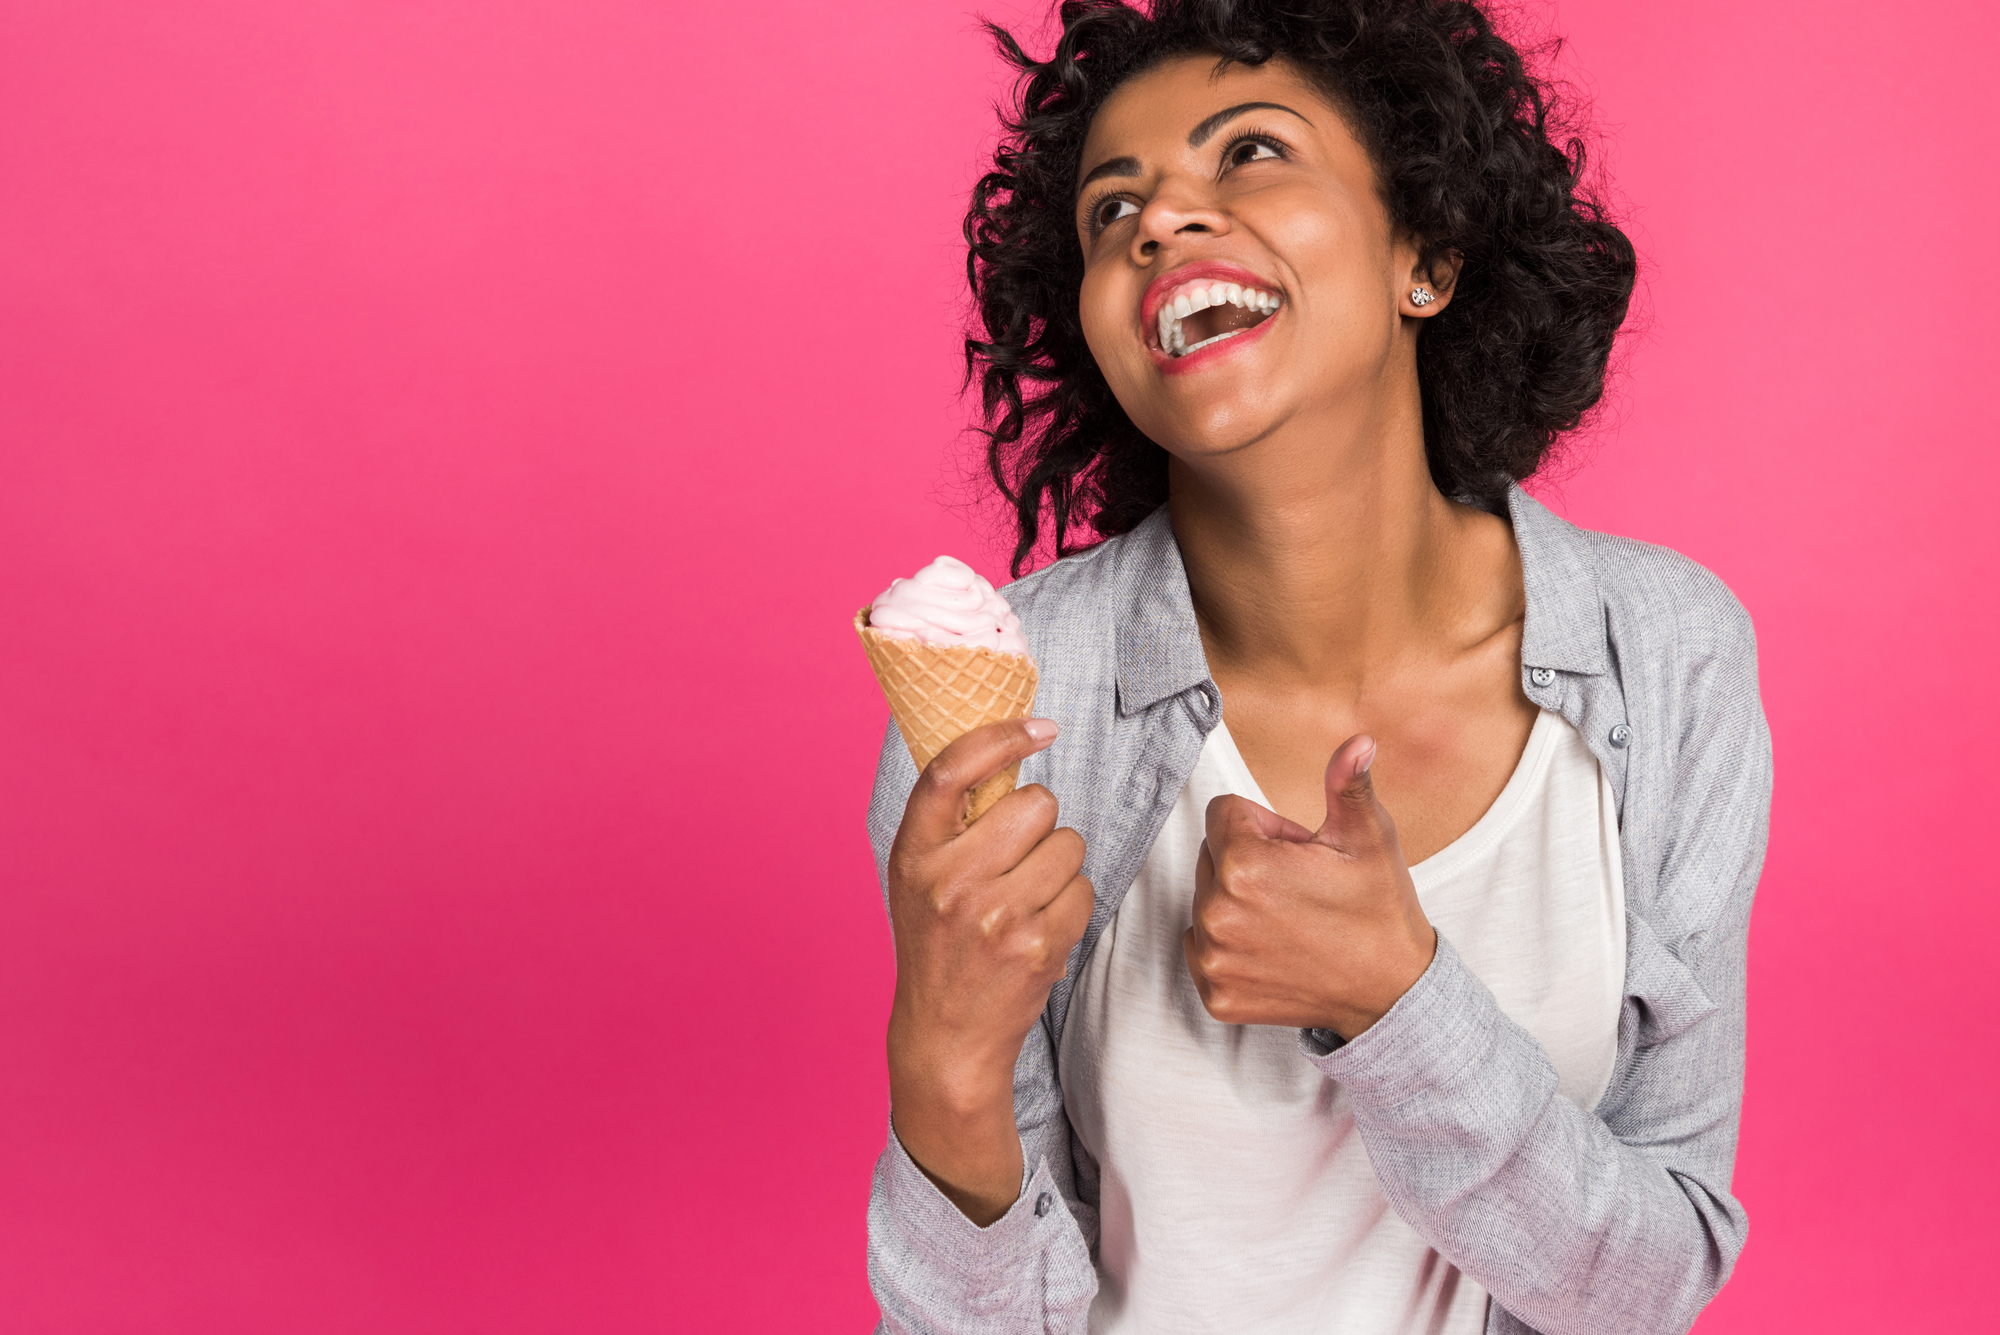 The Top Ten Reasons An Ice Cream Franchise is a Safe Investment